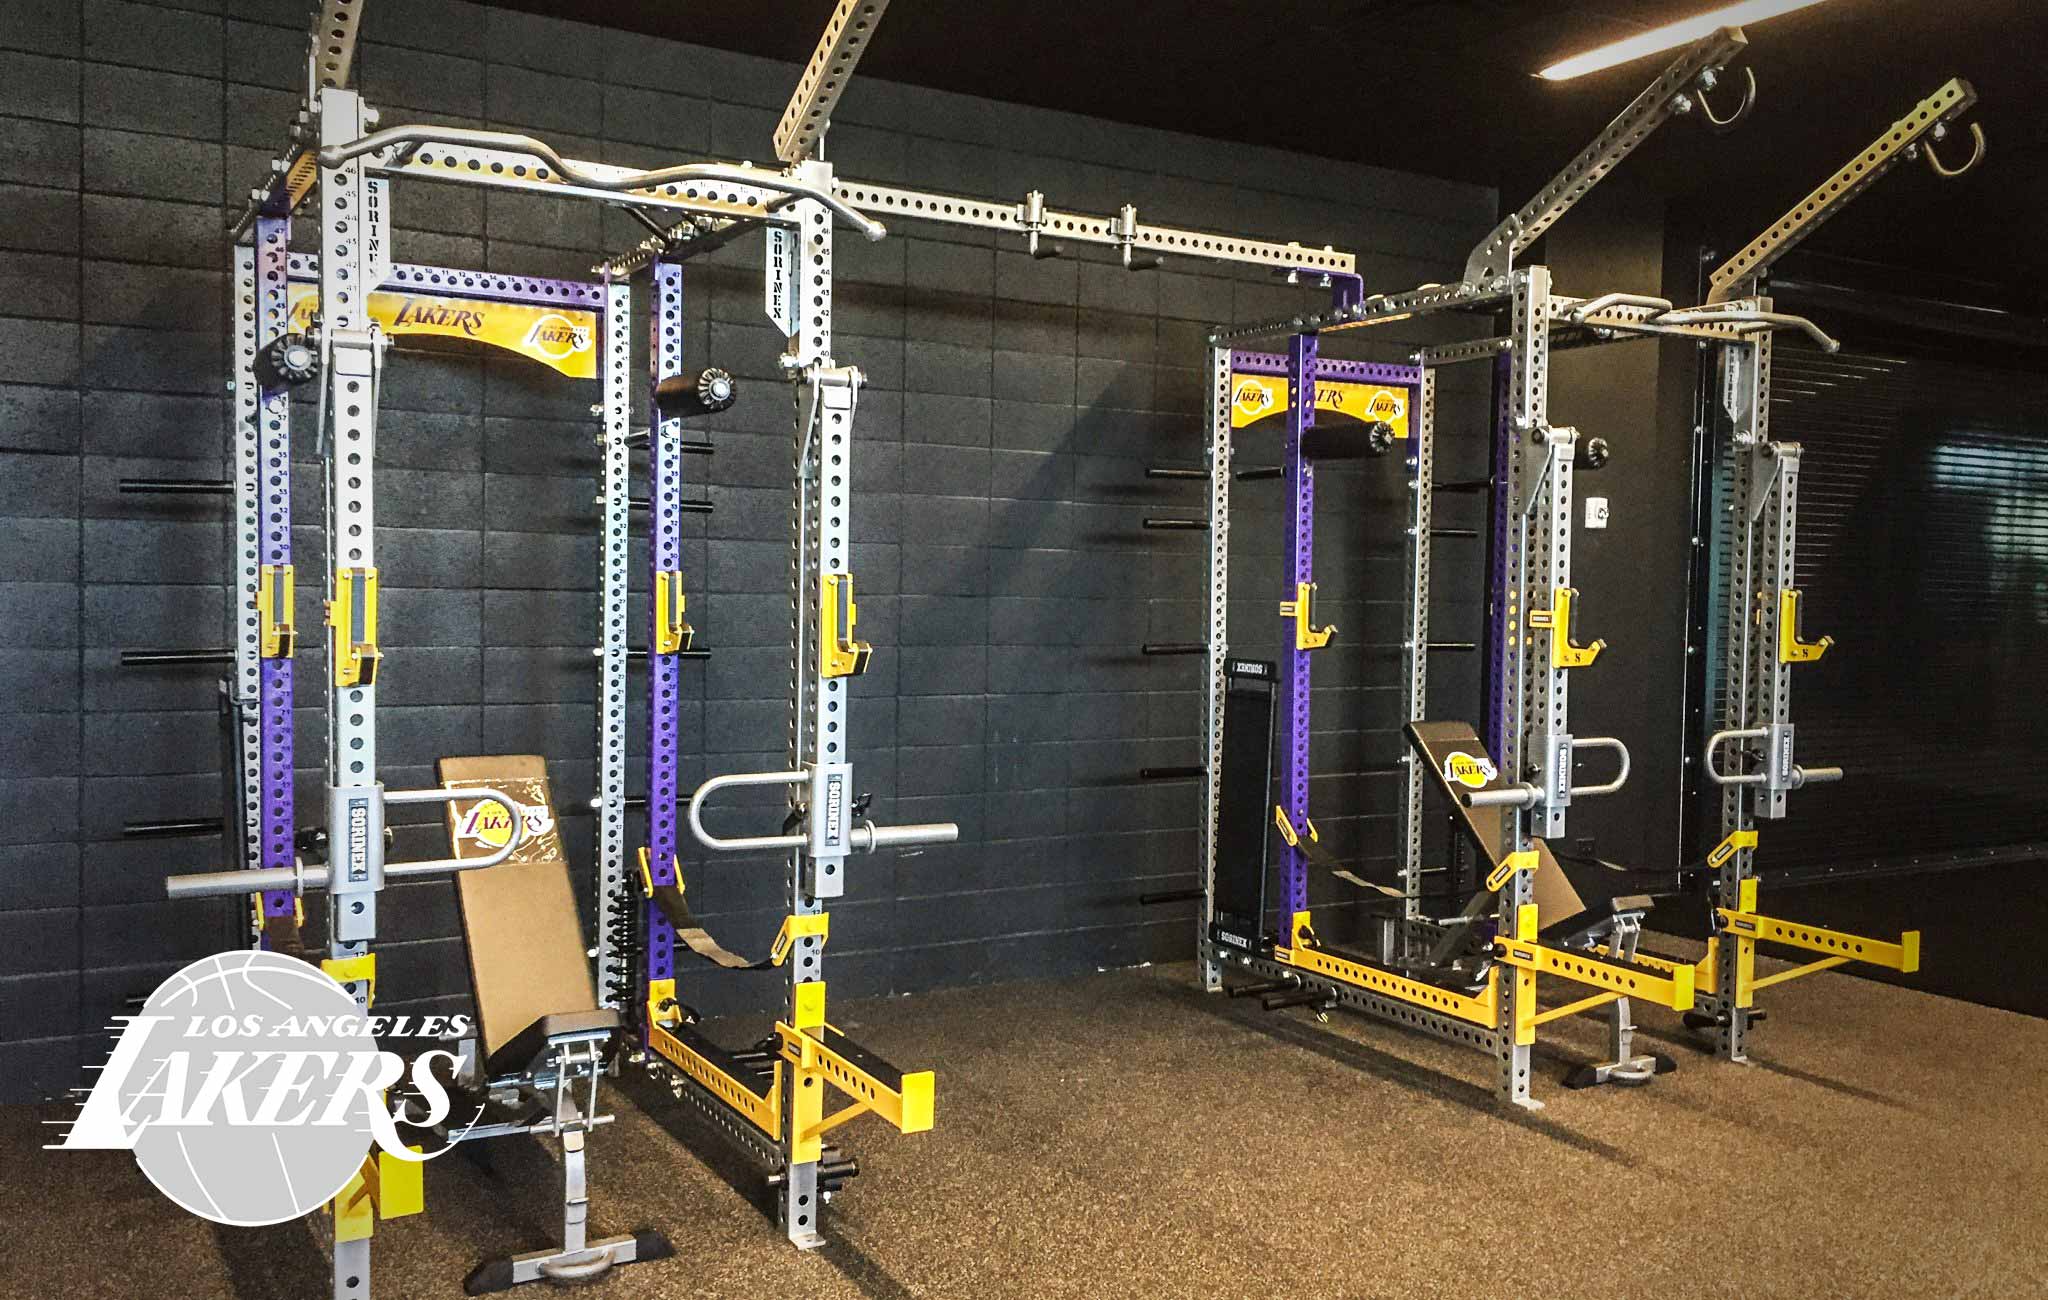 Los Angeles Lakers Sorinex strength and conditioning facility